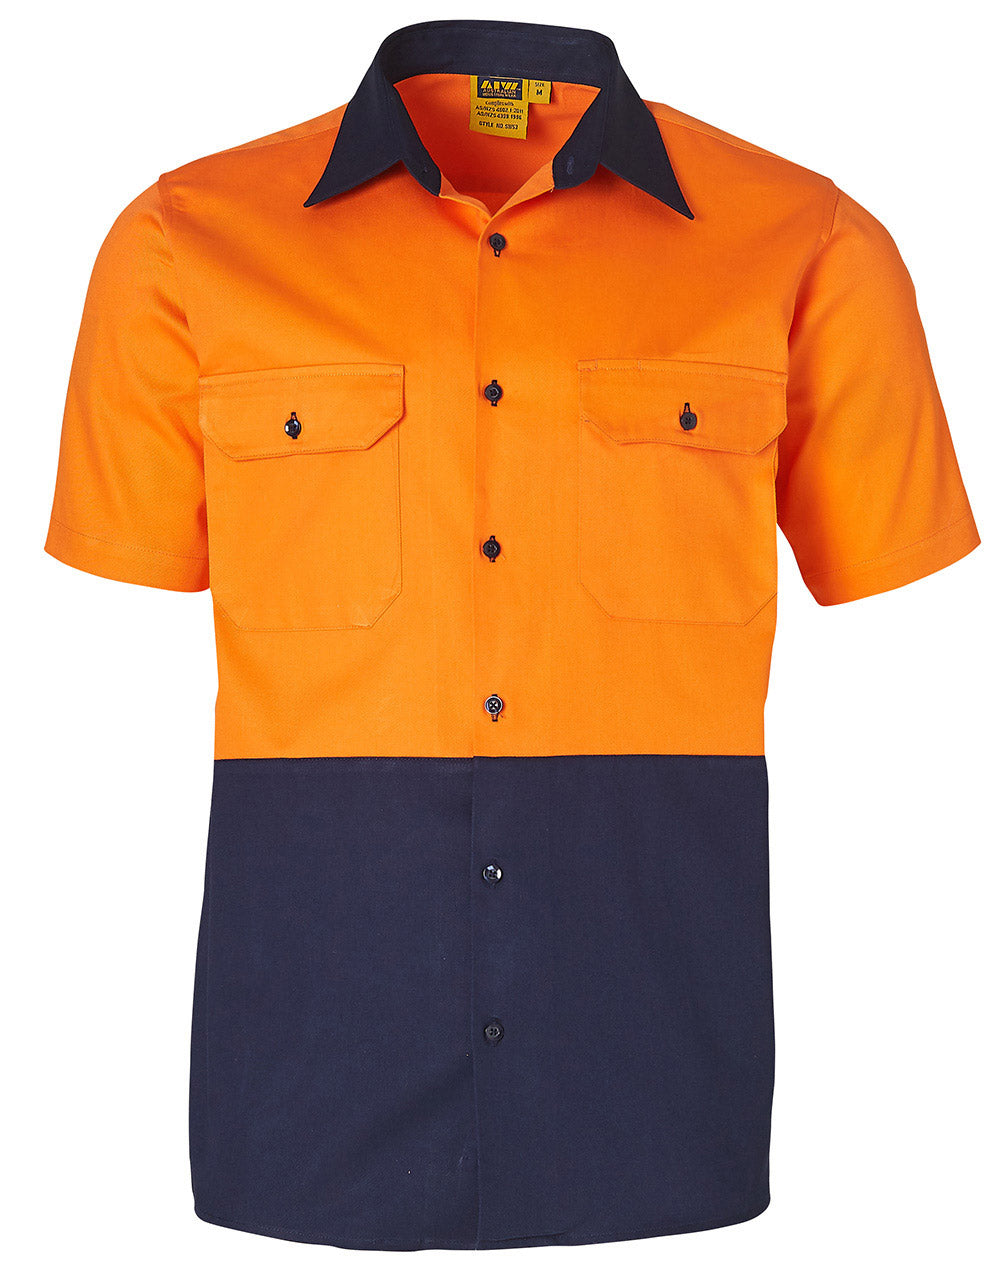 JCSW53 COTTON DRILL SAFETY SHIRT